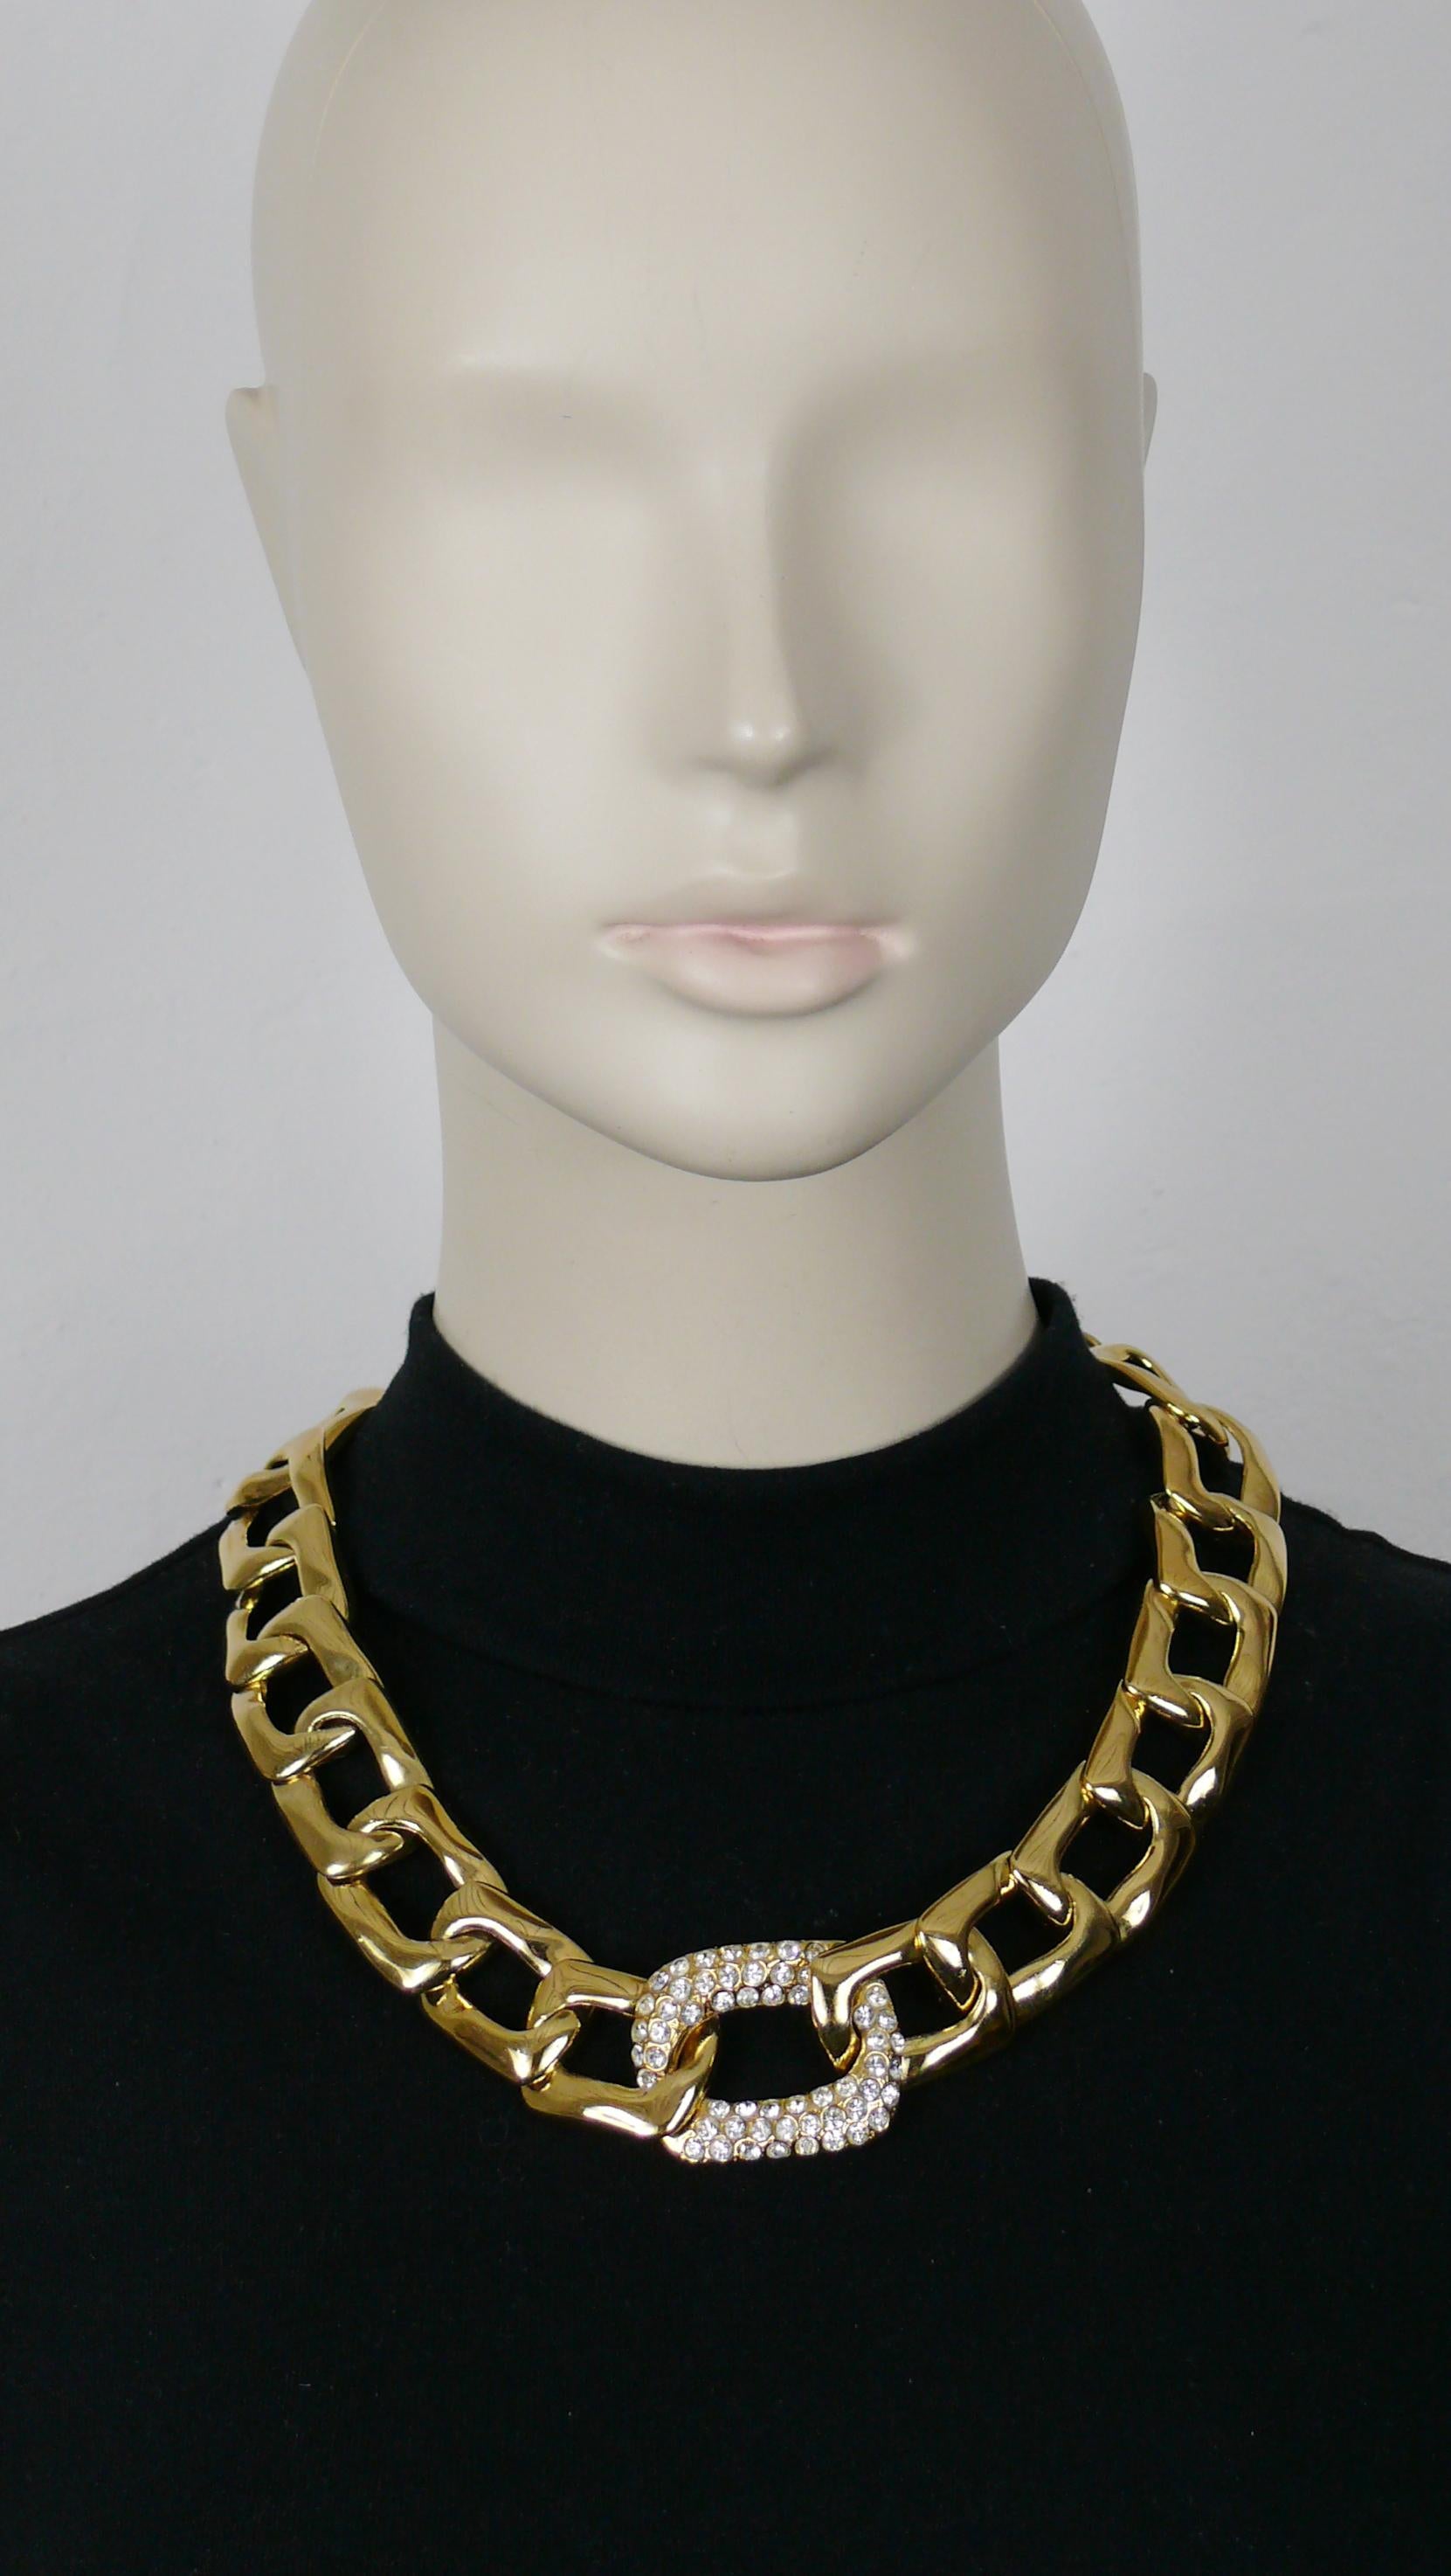 YVES SAINT LAURENT vintage gold tone curb chain necklace embellished with clear crystals.

Hook clasp closure.

Embossed YSL Made in France.

Indicative measurements : max. length approx. 59 cm (23.23 inches) / max. width approx. 3.2 cm (1.26